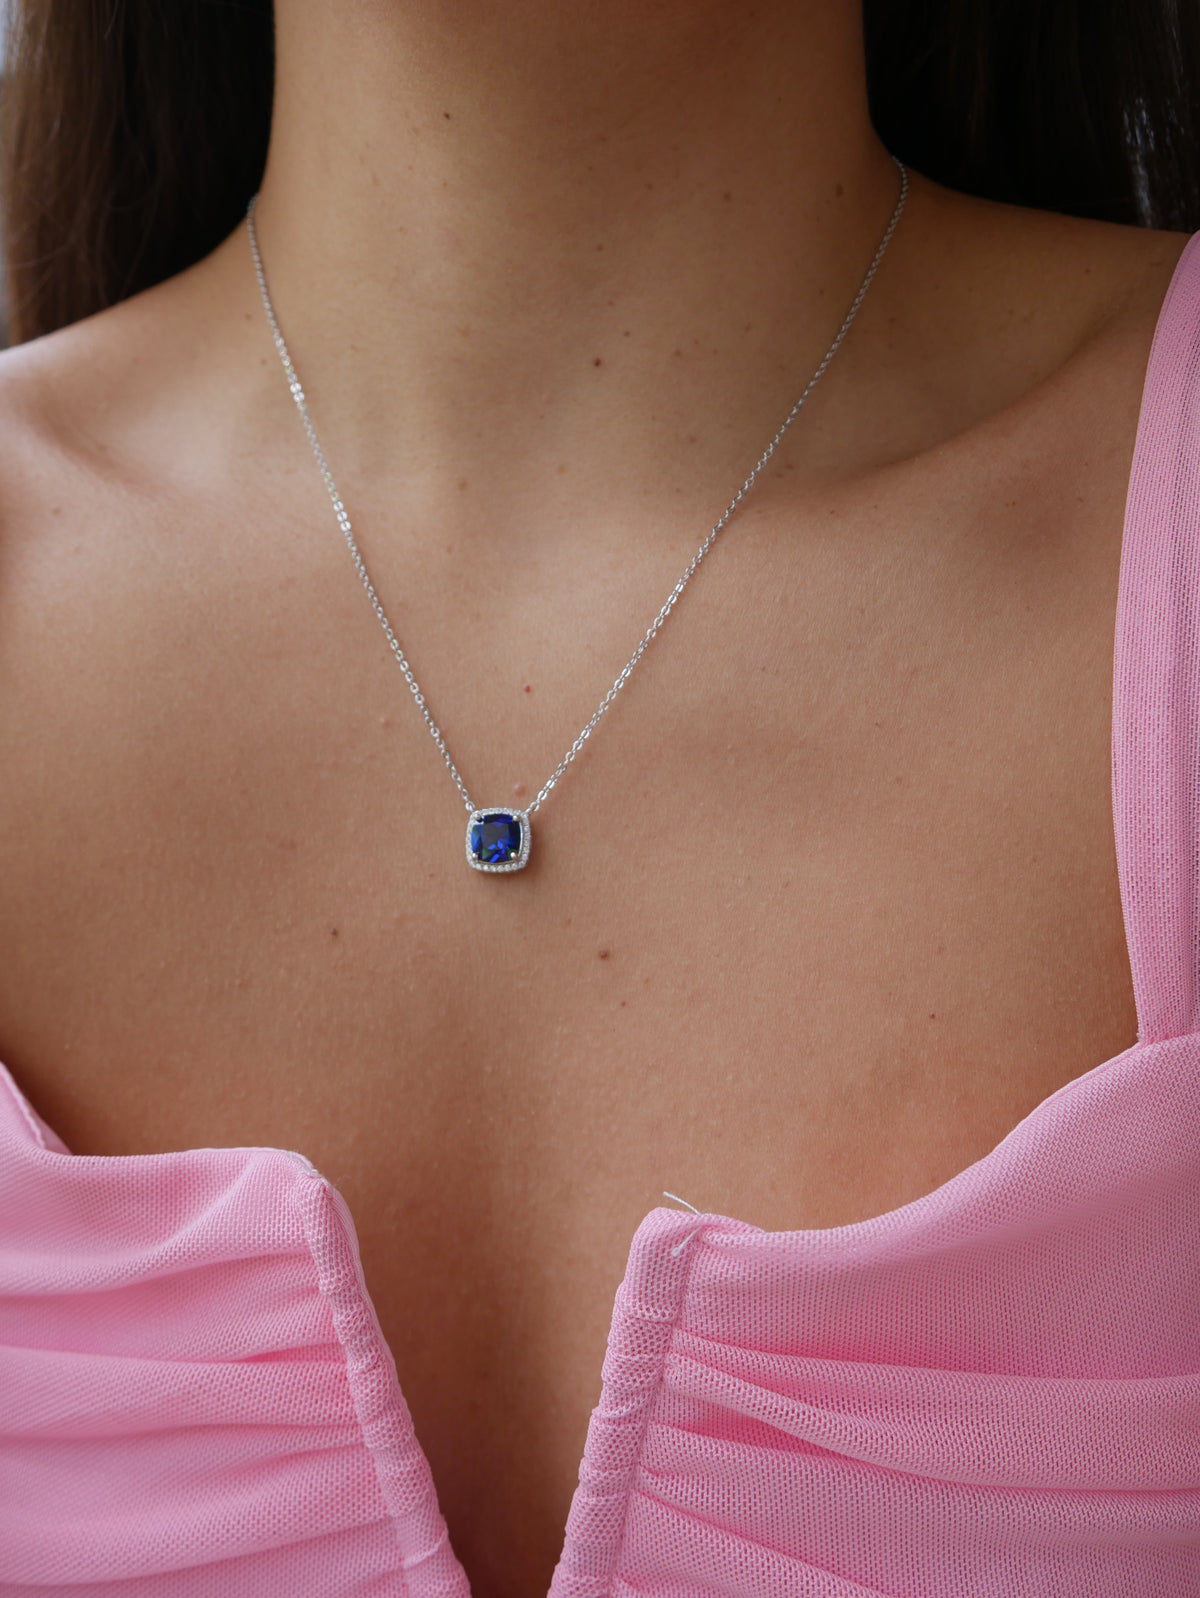 necklace, necklaces, blue necklaces, sapphire necklaces, saphire necklaces, cadenas con  safiro, square necklaces, cushion cut necklaces, nice necklaces, nice jewelry, new womens fashion, birthday gifts, anniversary gifts, nice jewelry, whte gold necklace, birthstone jewelry 